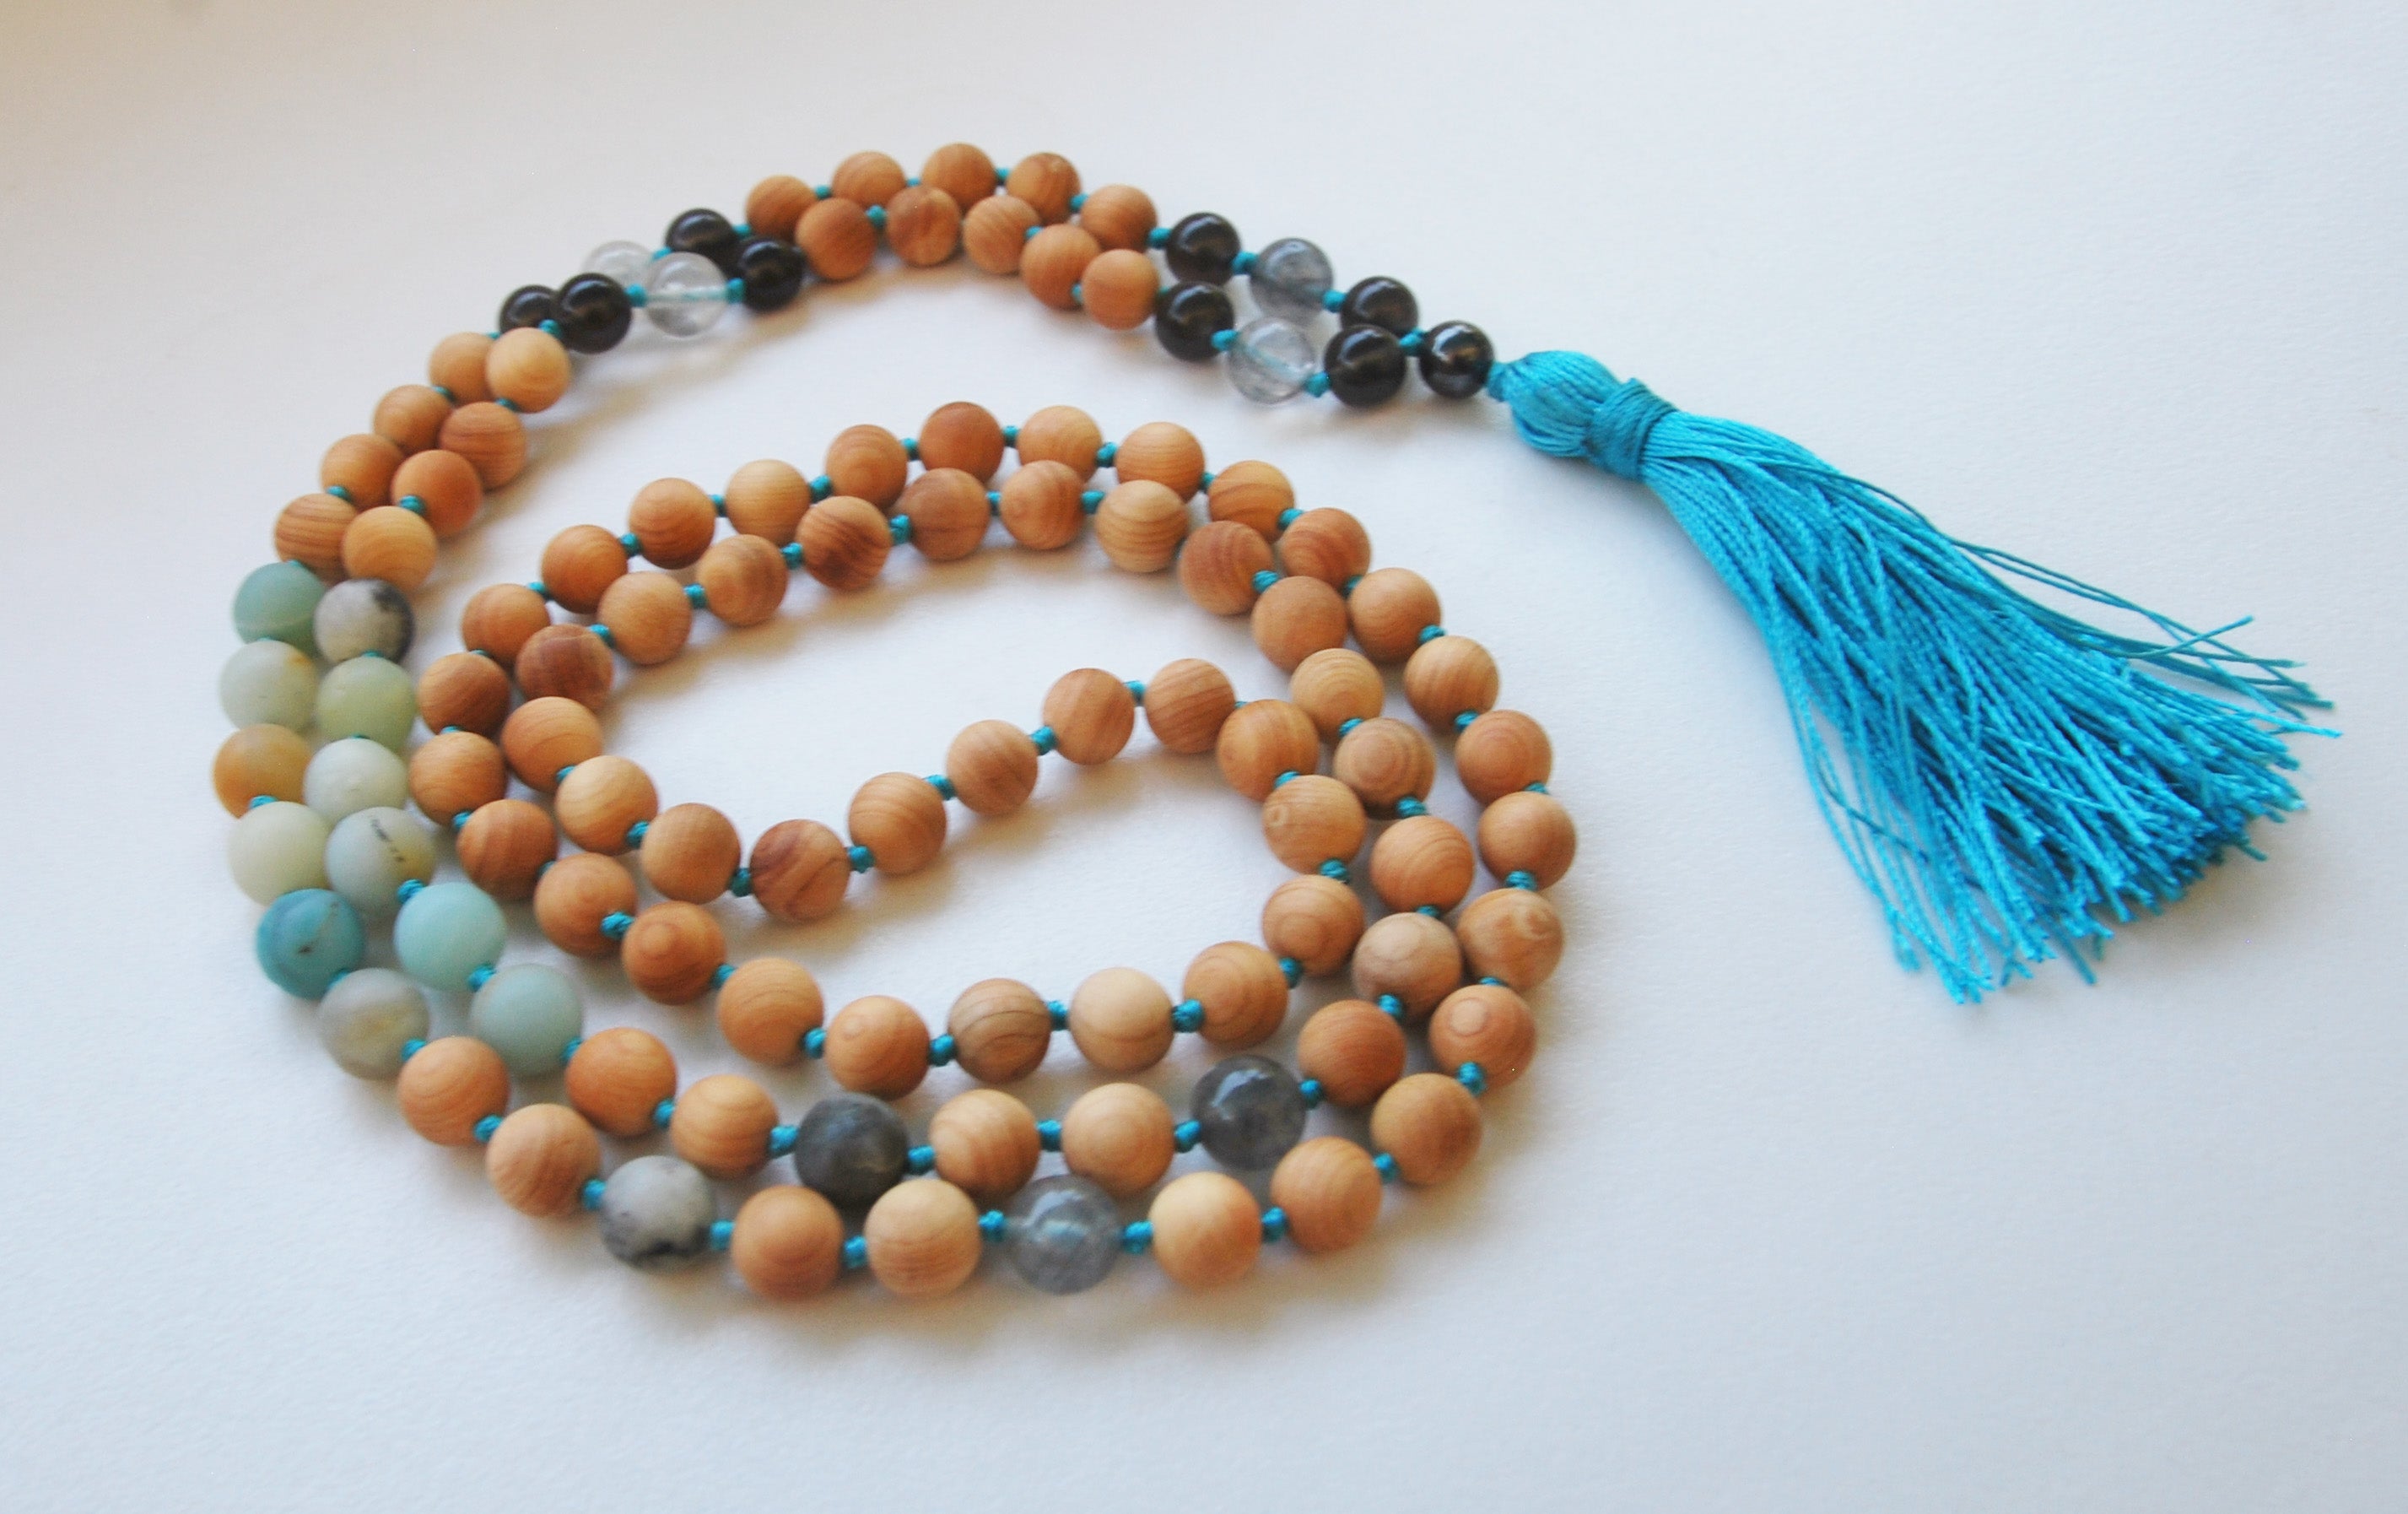 8mm Cypress & Amazonite 108 Knotted Mala Necklace with Colored Tassel